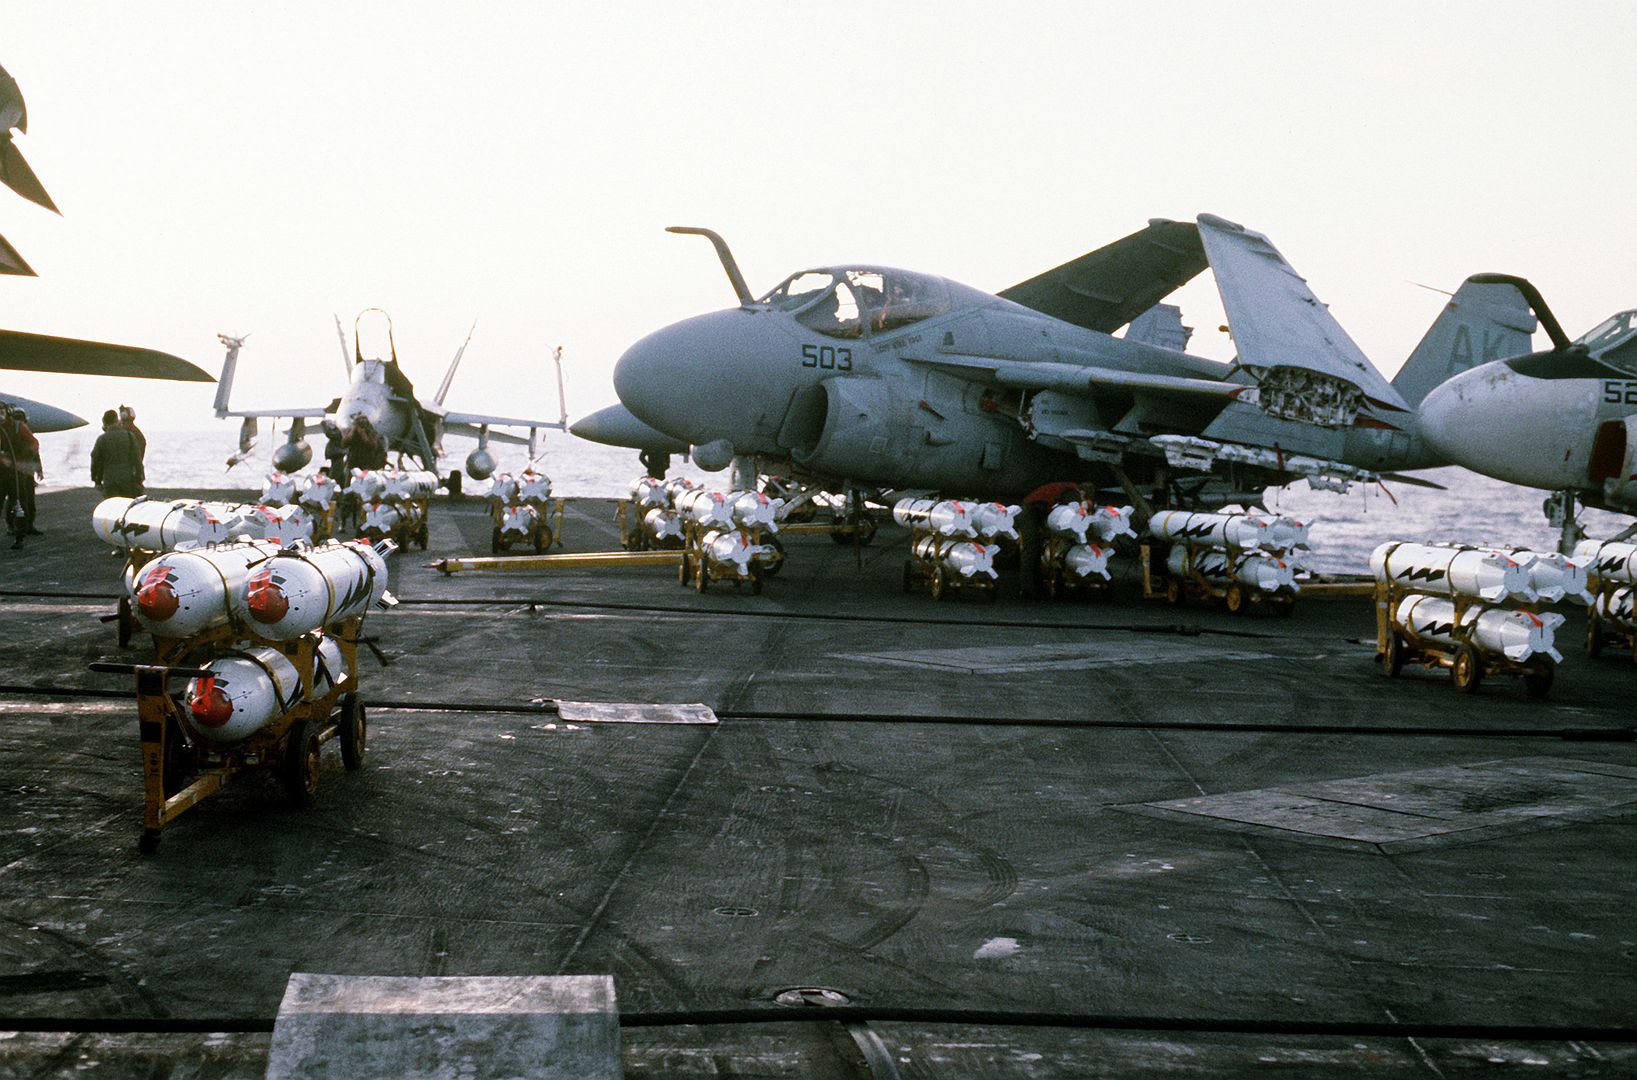 Bomb Skids Loaded With CBU 59 Cluster Bombs Are Staged On The Flight Deck Of The Aircraft Carrier USS CORAL SEA Prior To Being Loaded Aboard A 6E Intruder Aircraft For An Air Strike On Targets In Libya